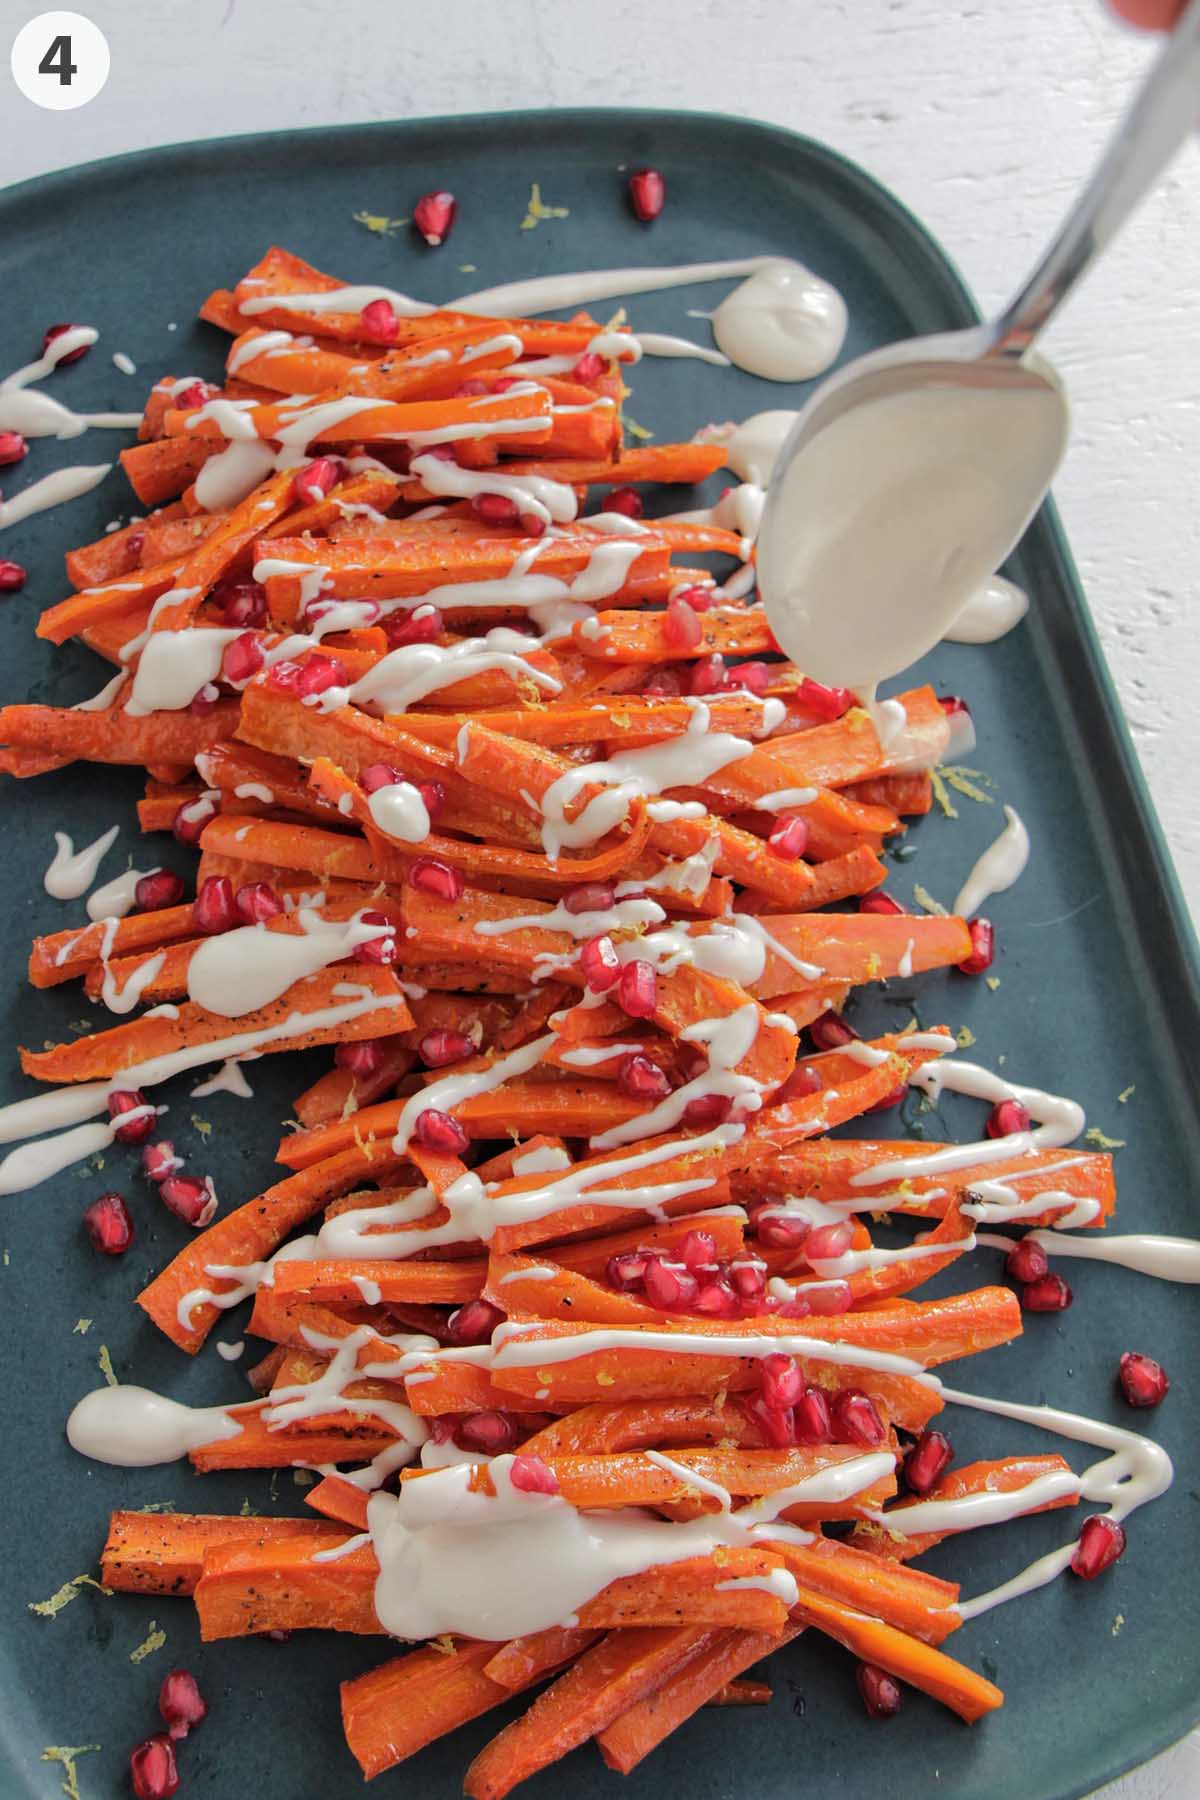 numbered photo showing spoon drizzling tahini dressing over roasted carrots.